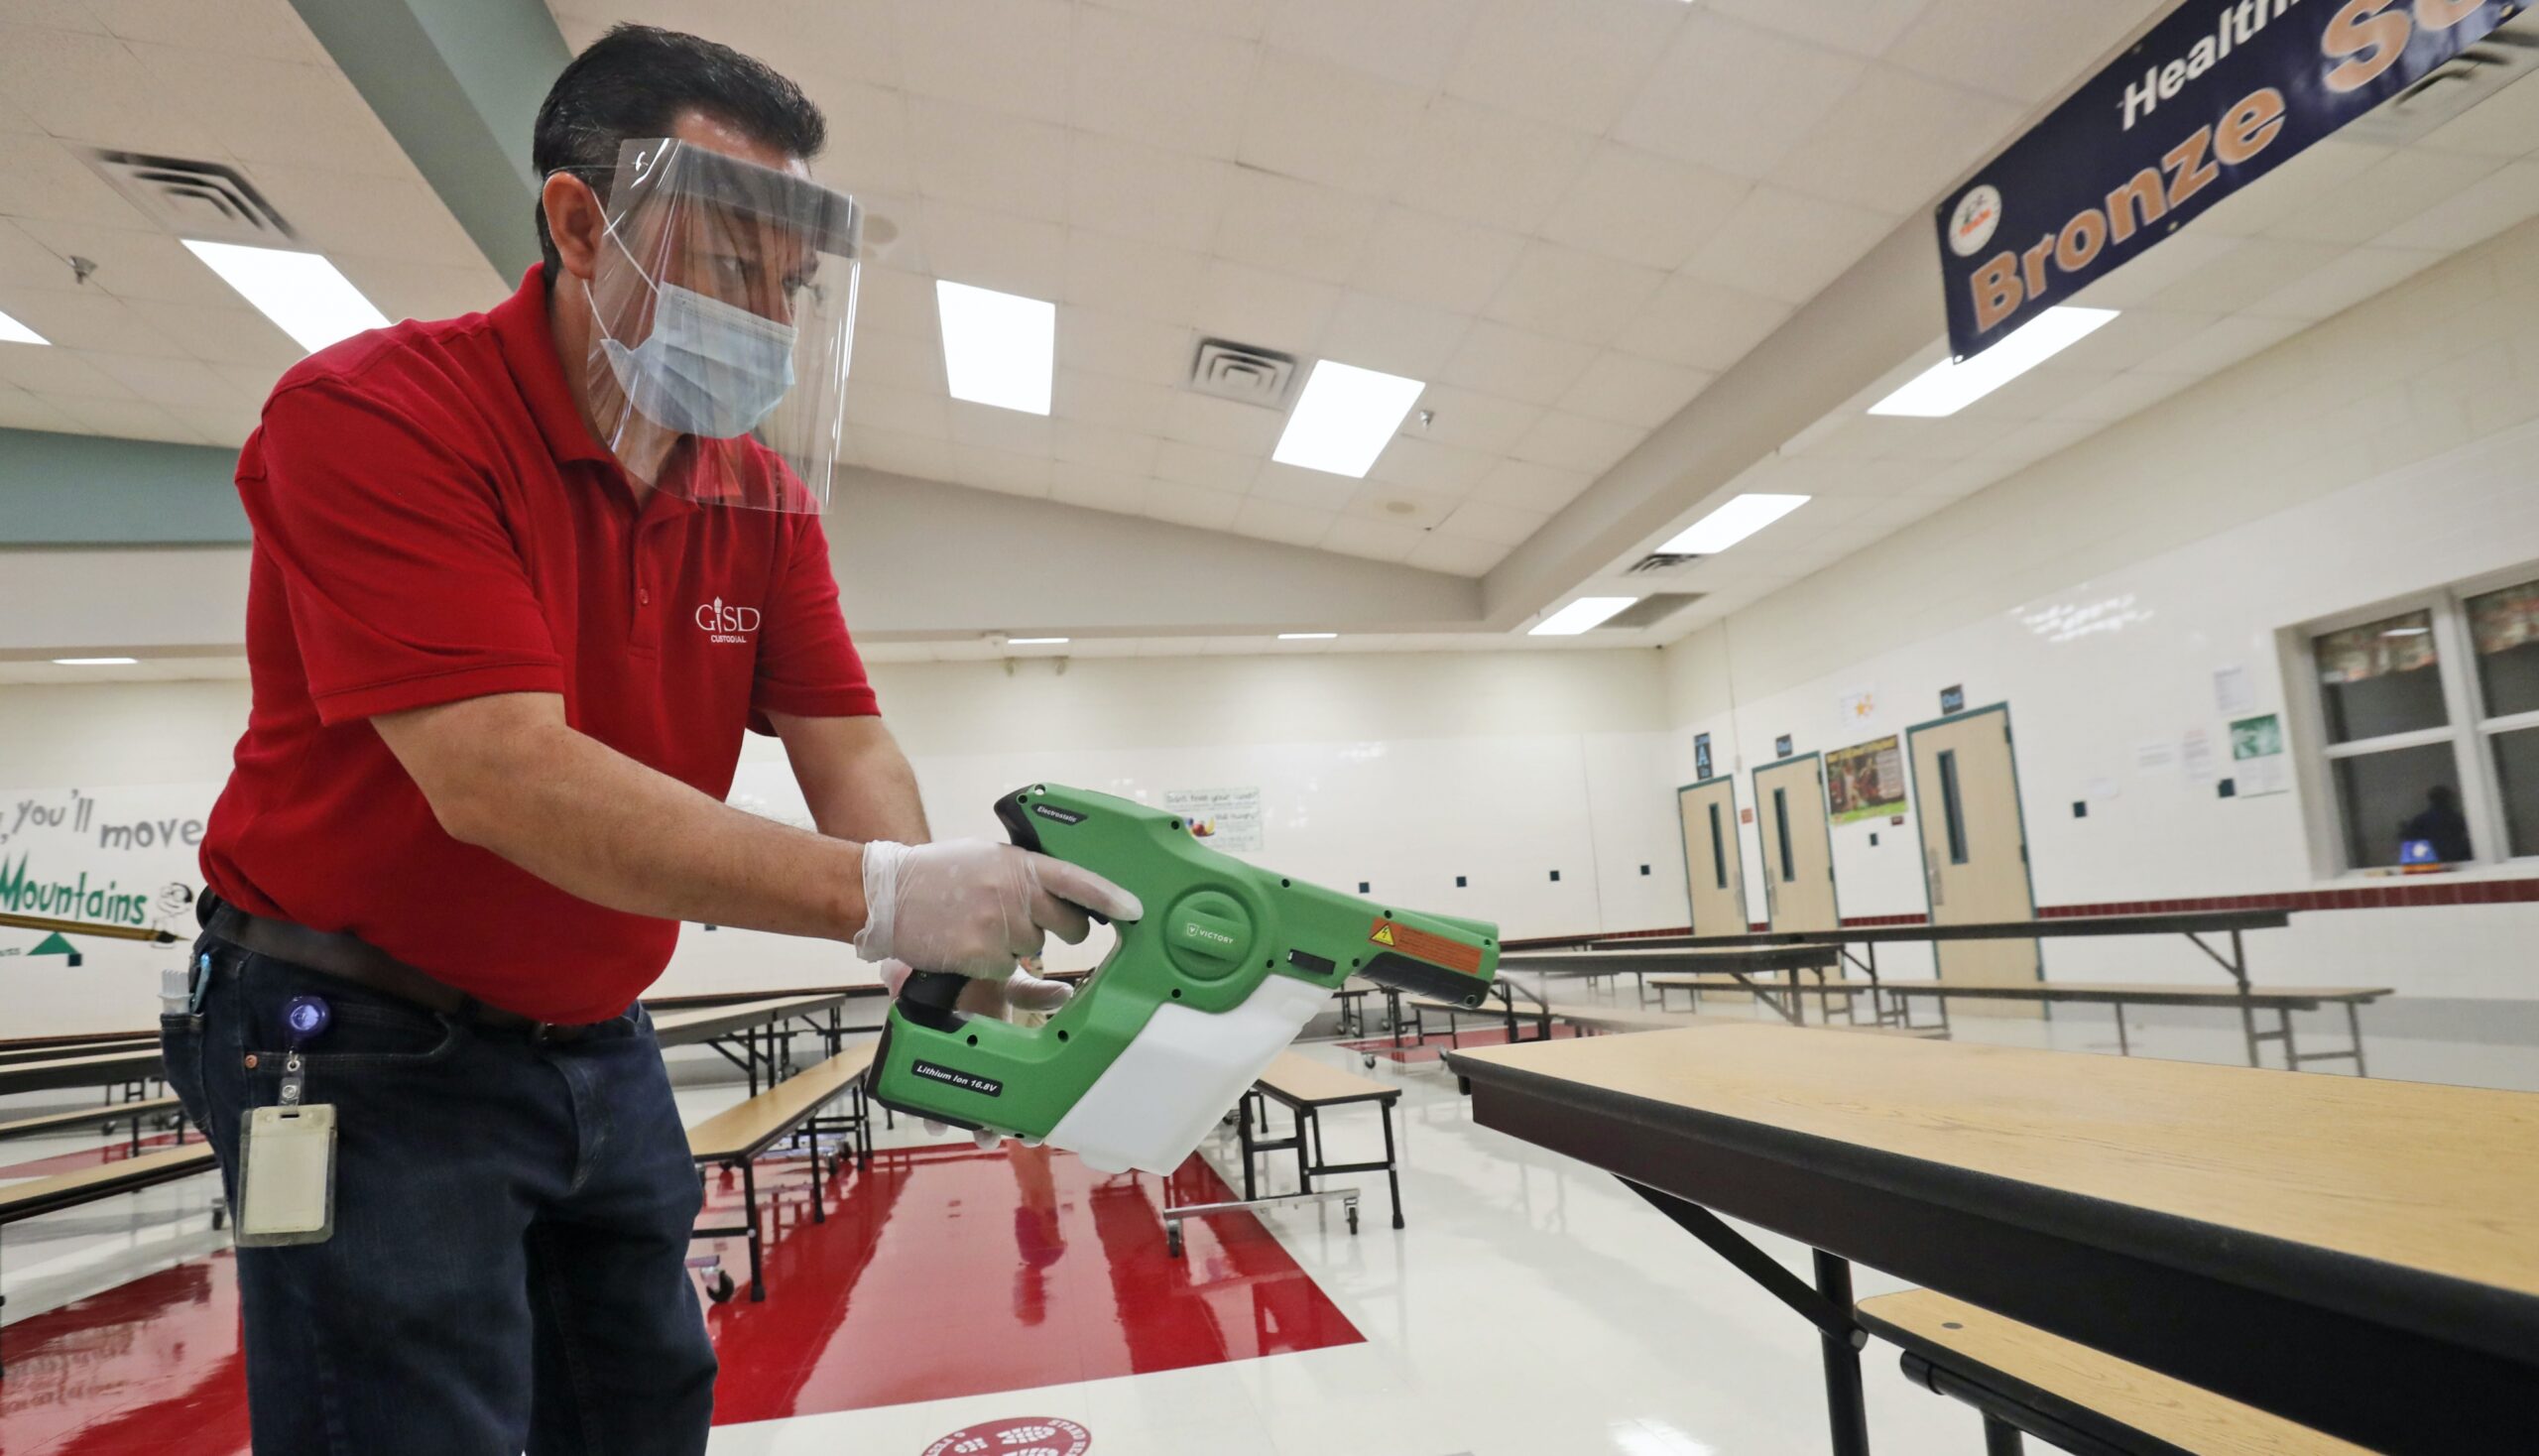 A custodian cleans the cafeteria at a Texas elementary school.